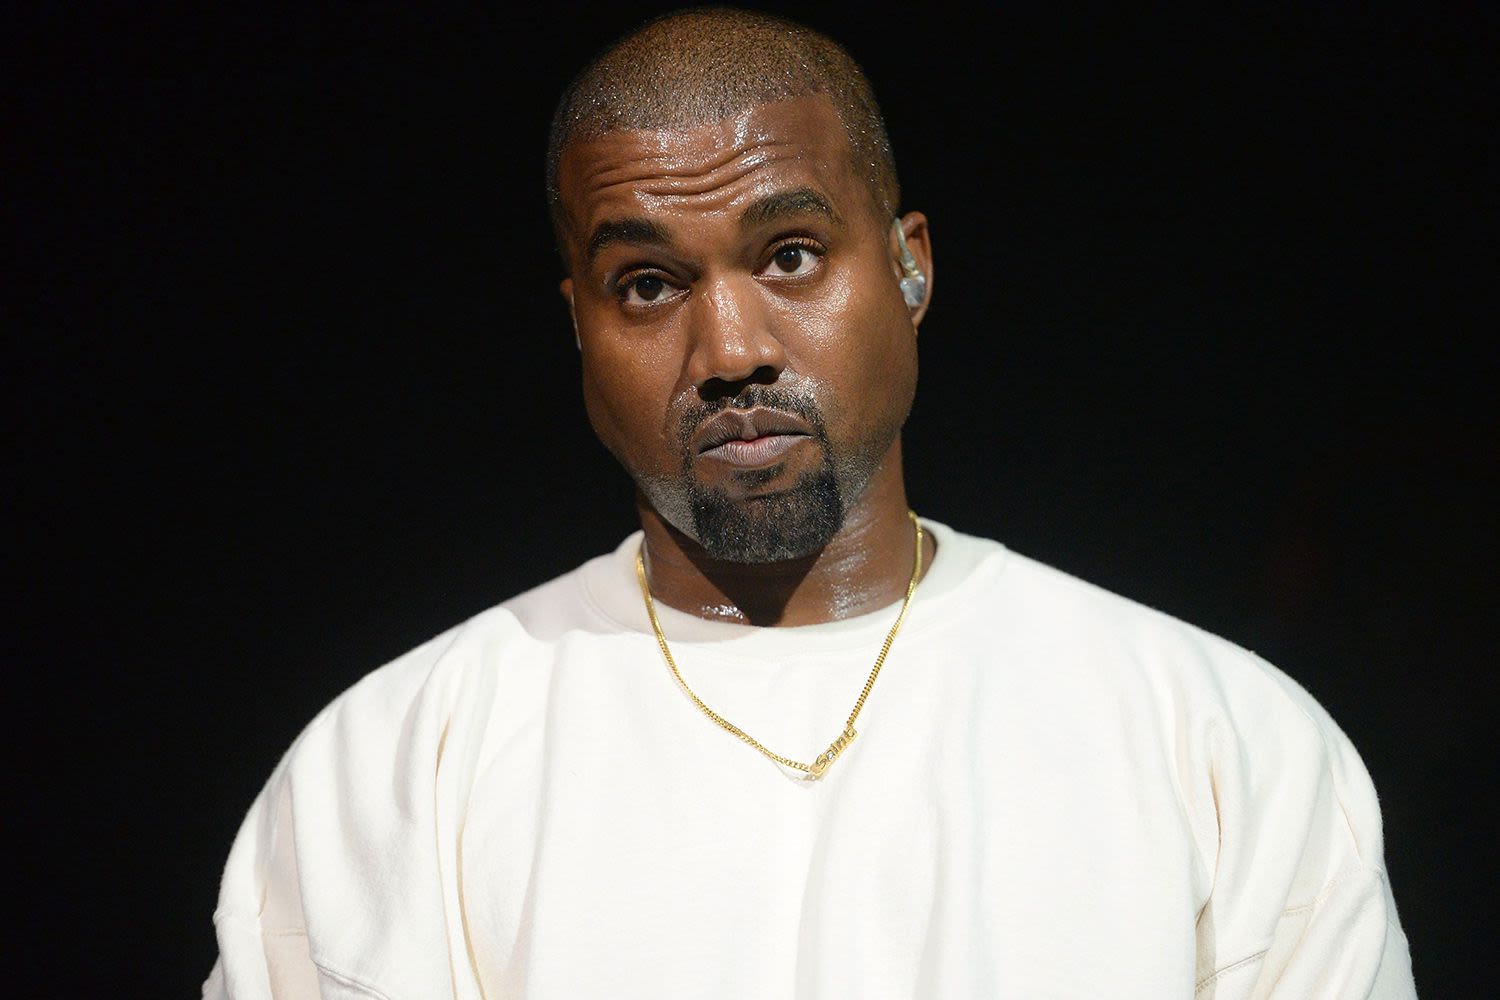 Kanye West's Ex-Assistant Sues Him for Sexual Harassment and Wrongful Termination